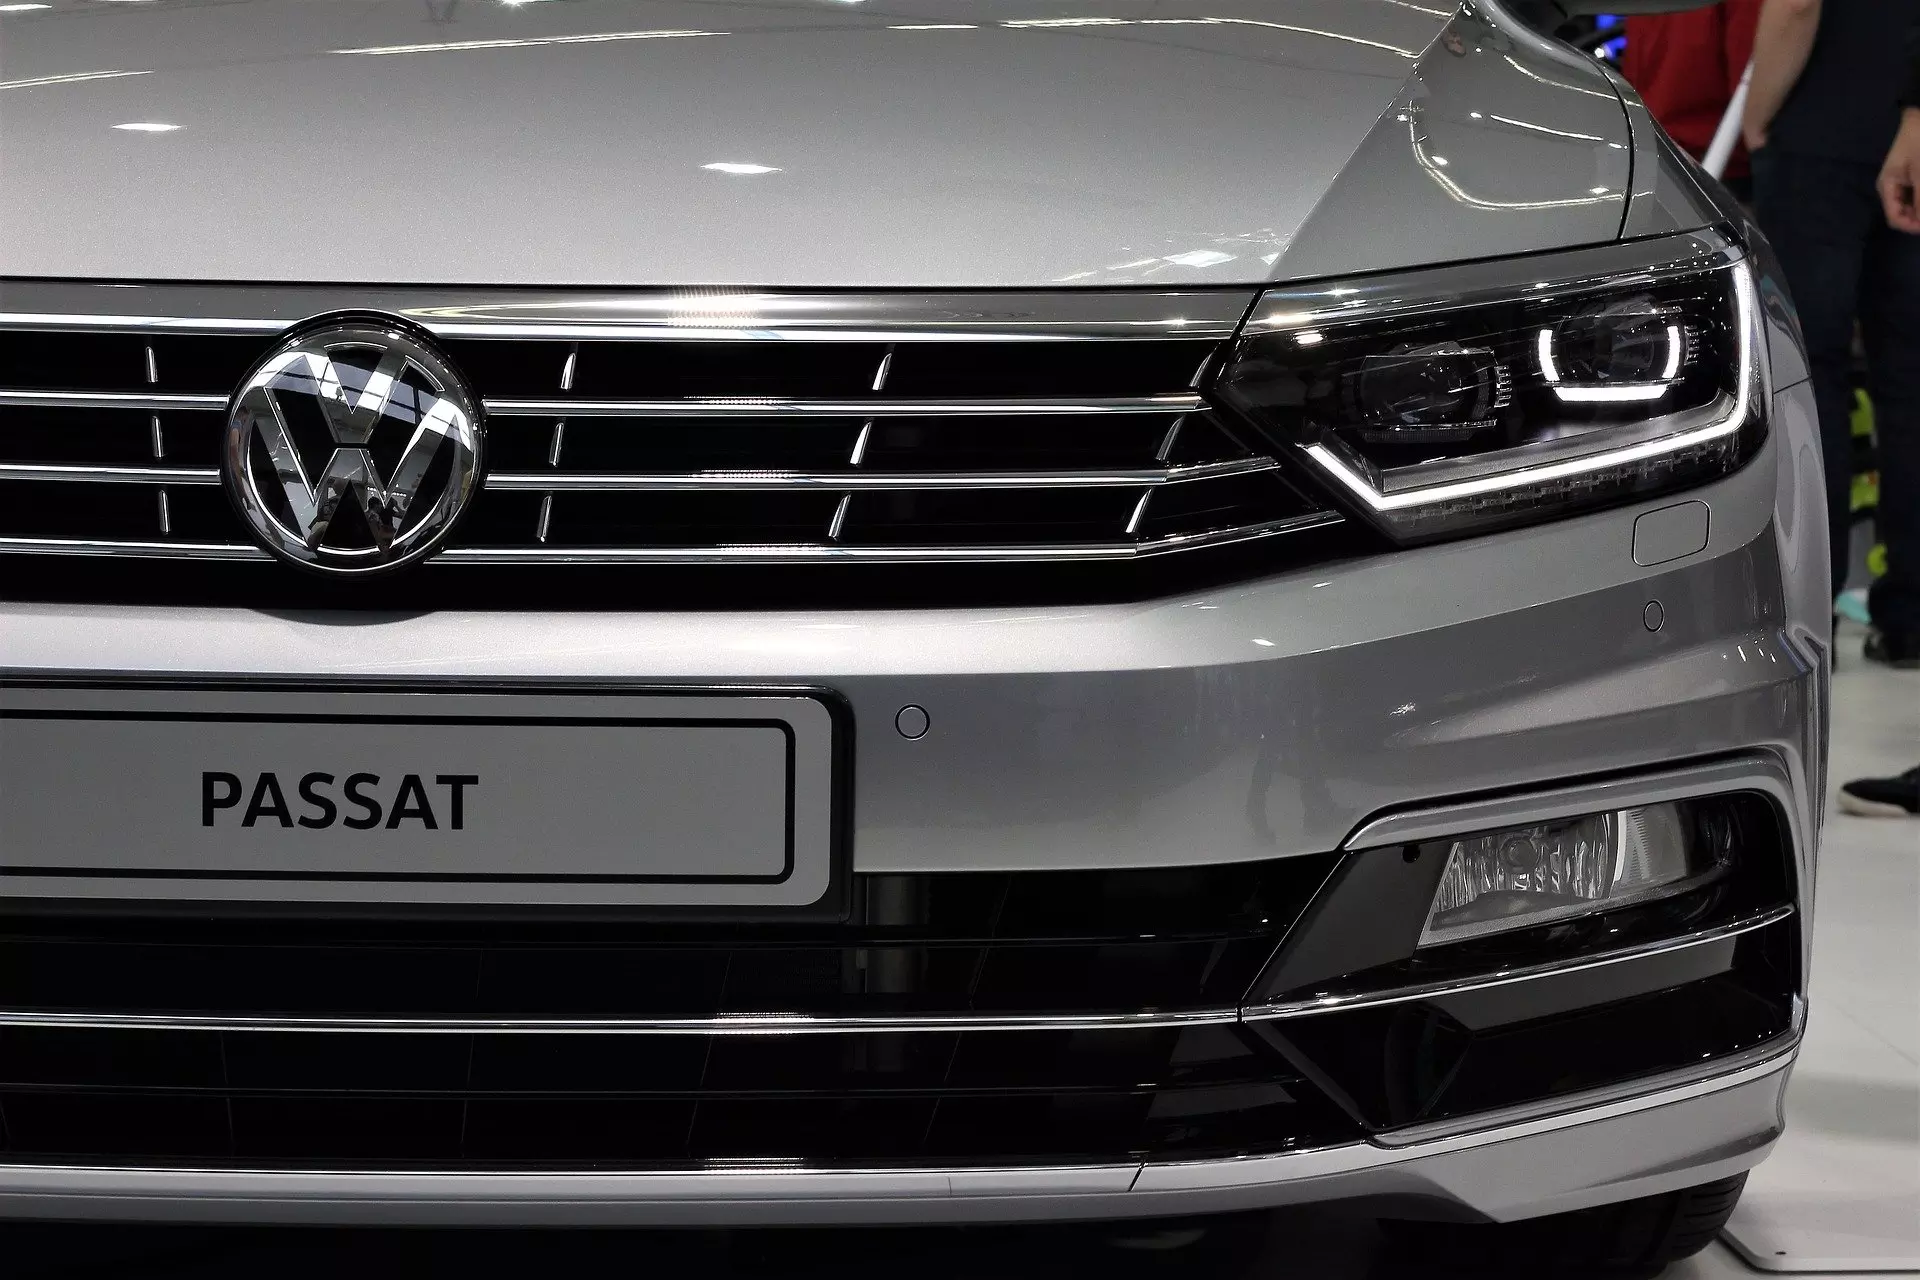 Volkswagen Passat Estate: What is the Best Used Estate Car To Buy Today? Hampshire